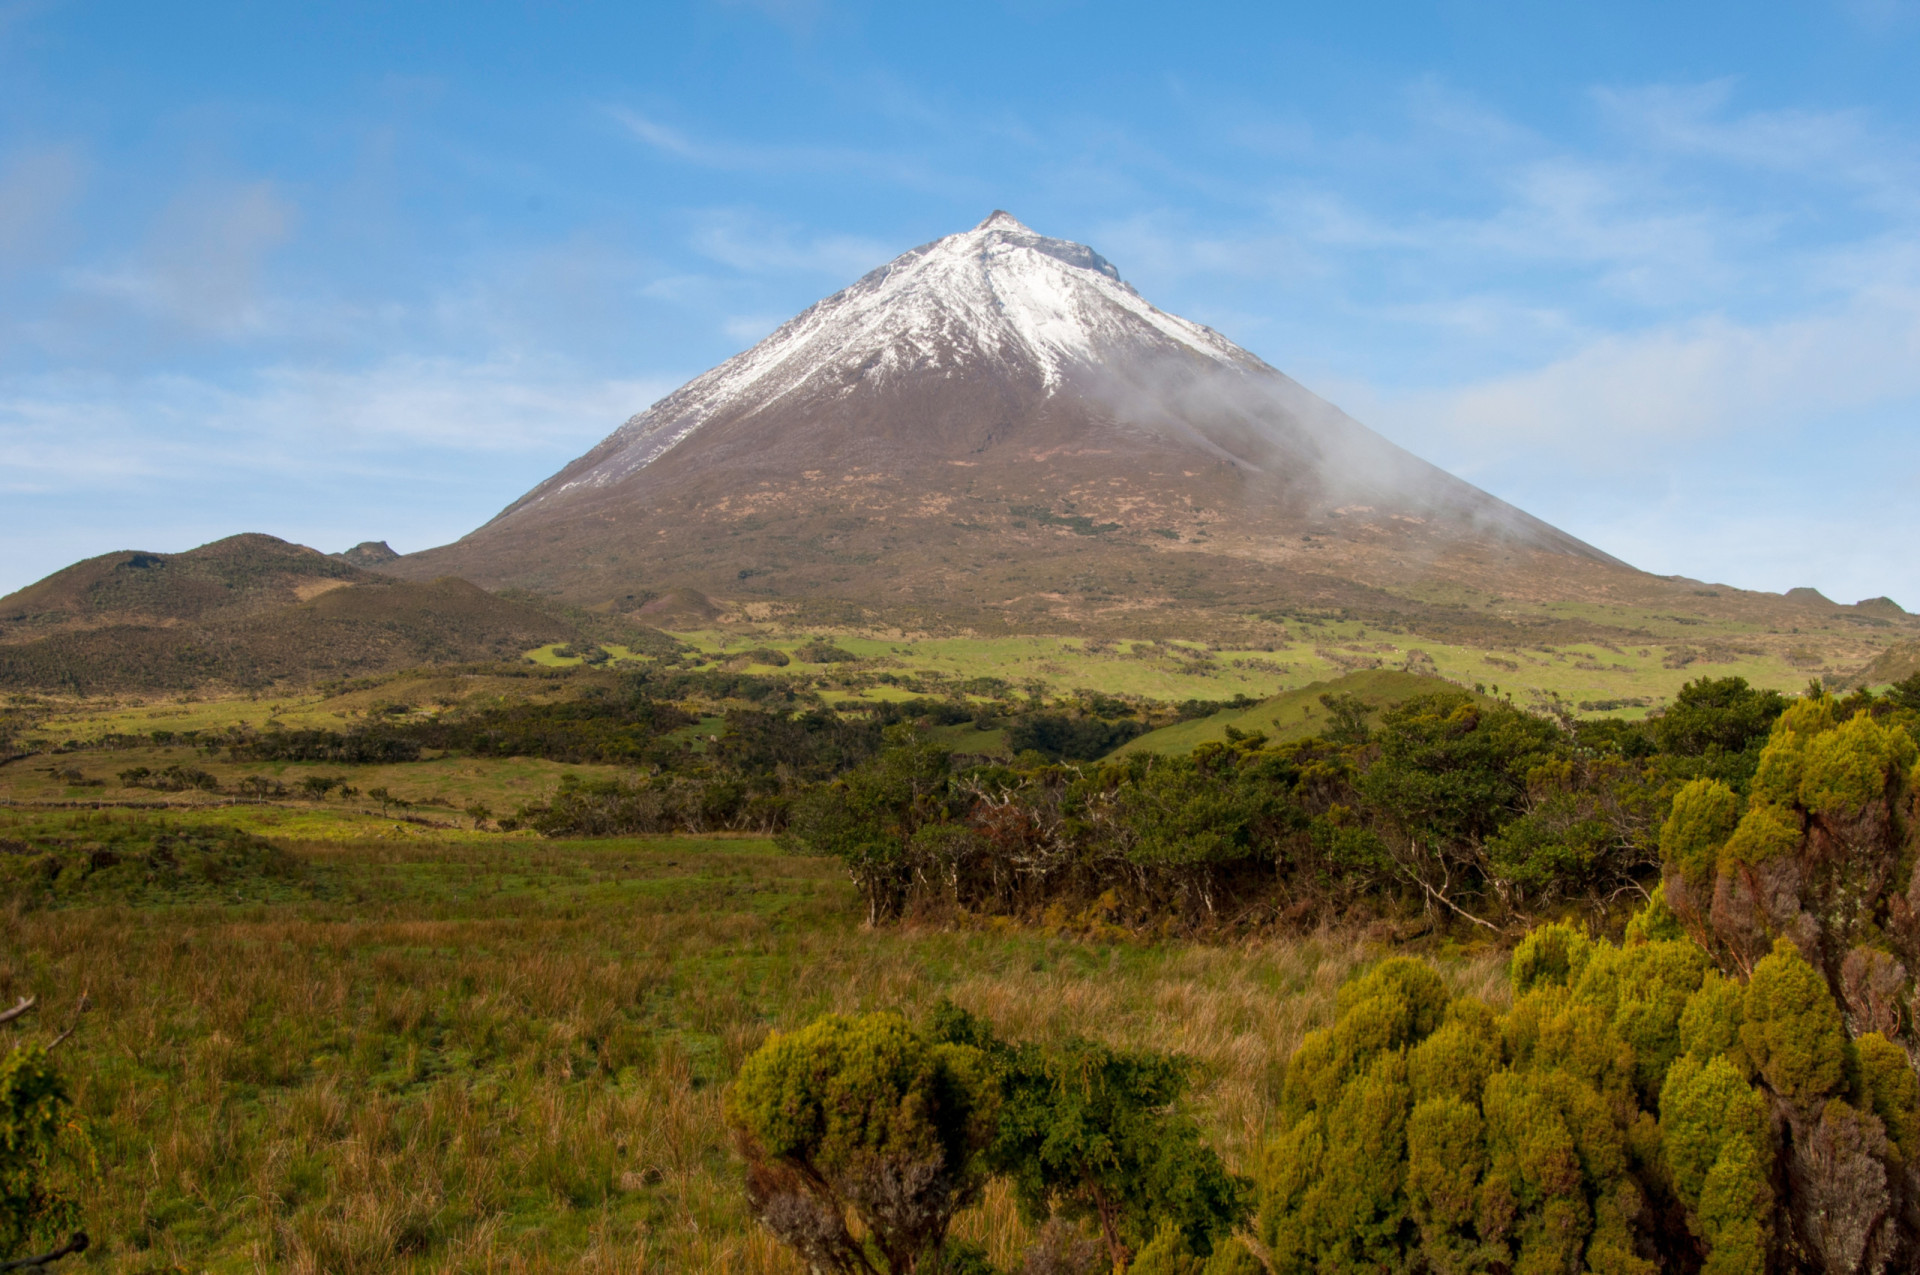 <p>The highest mountain in Portugal, at 7,713 feet (2,351 m) above sea level, Mount Pico is one of the great natural wonders of the mid-Atlantic Azores archipelago. A dormant stratovolcano, Pico last vented anger in 1720.</p><p><a href="https://www.msn.com/en-us/community/channel/vid-7xx8mnucu55yw63we9va2gwr7uihbxwc68fxqp25x6tg4ftibpra?cvid=94631541bc0f4f89bfd59158d696ad7e">Follow us and access great exclusive content every day</a></p>